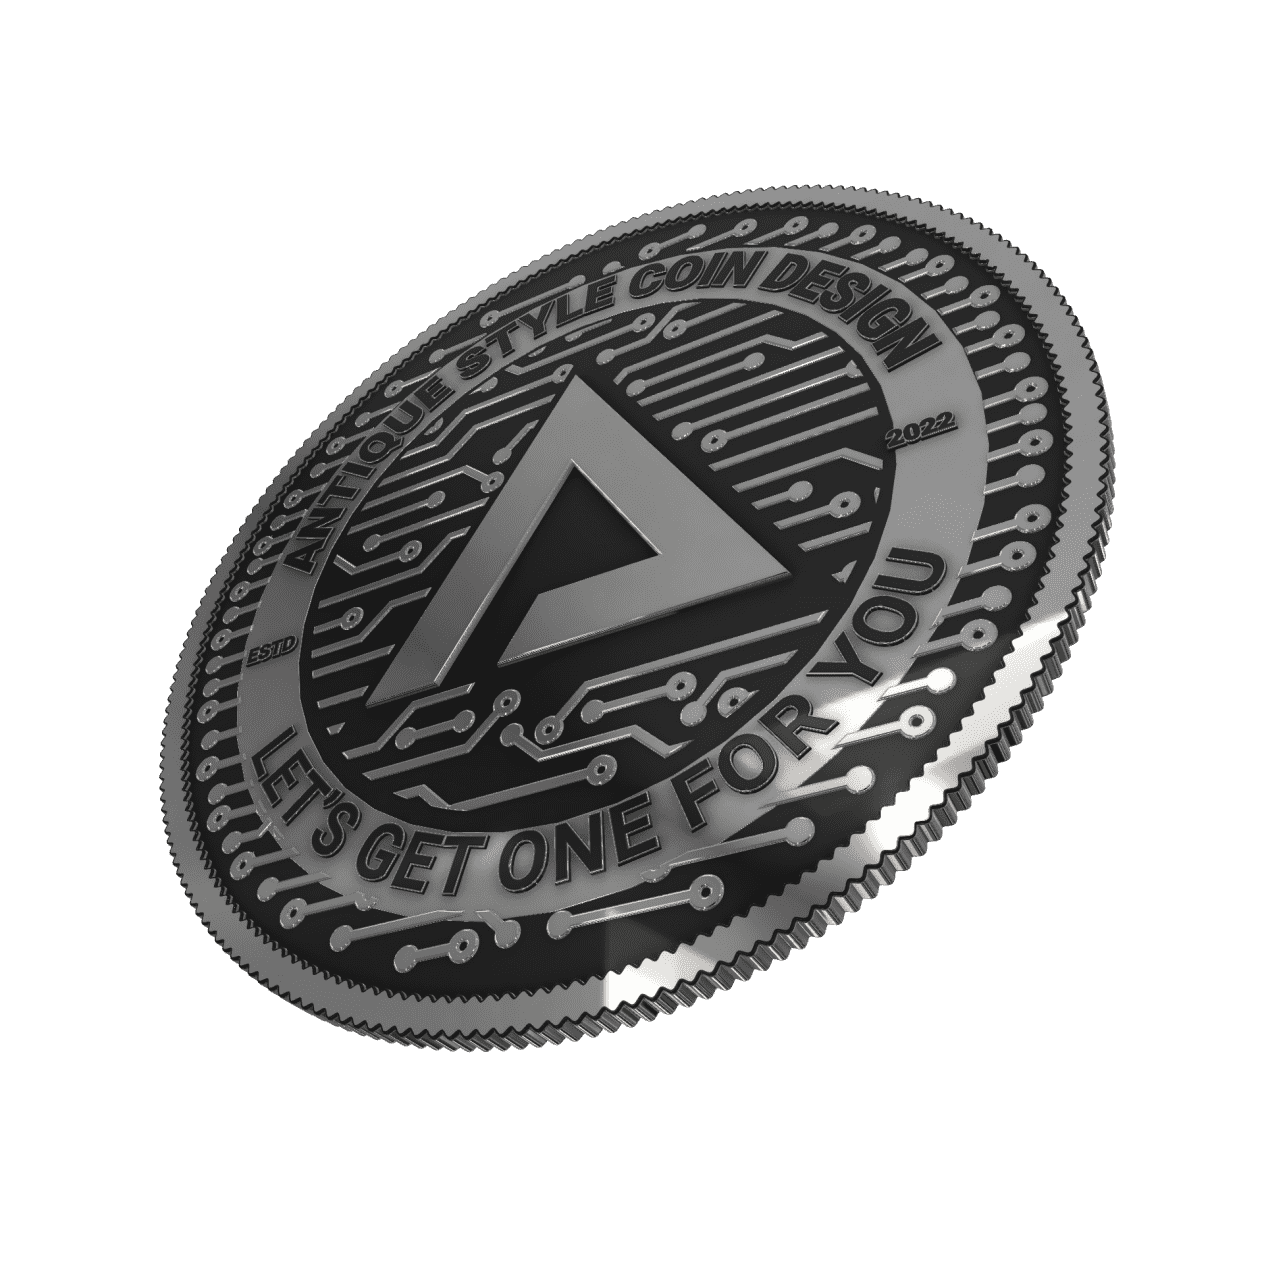 I will do a cryptocurrency, token, challenge coin, and coin design